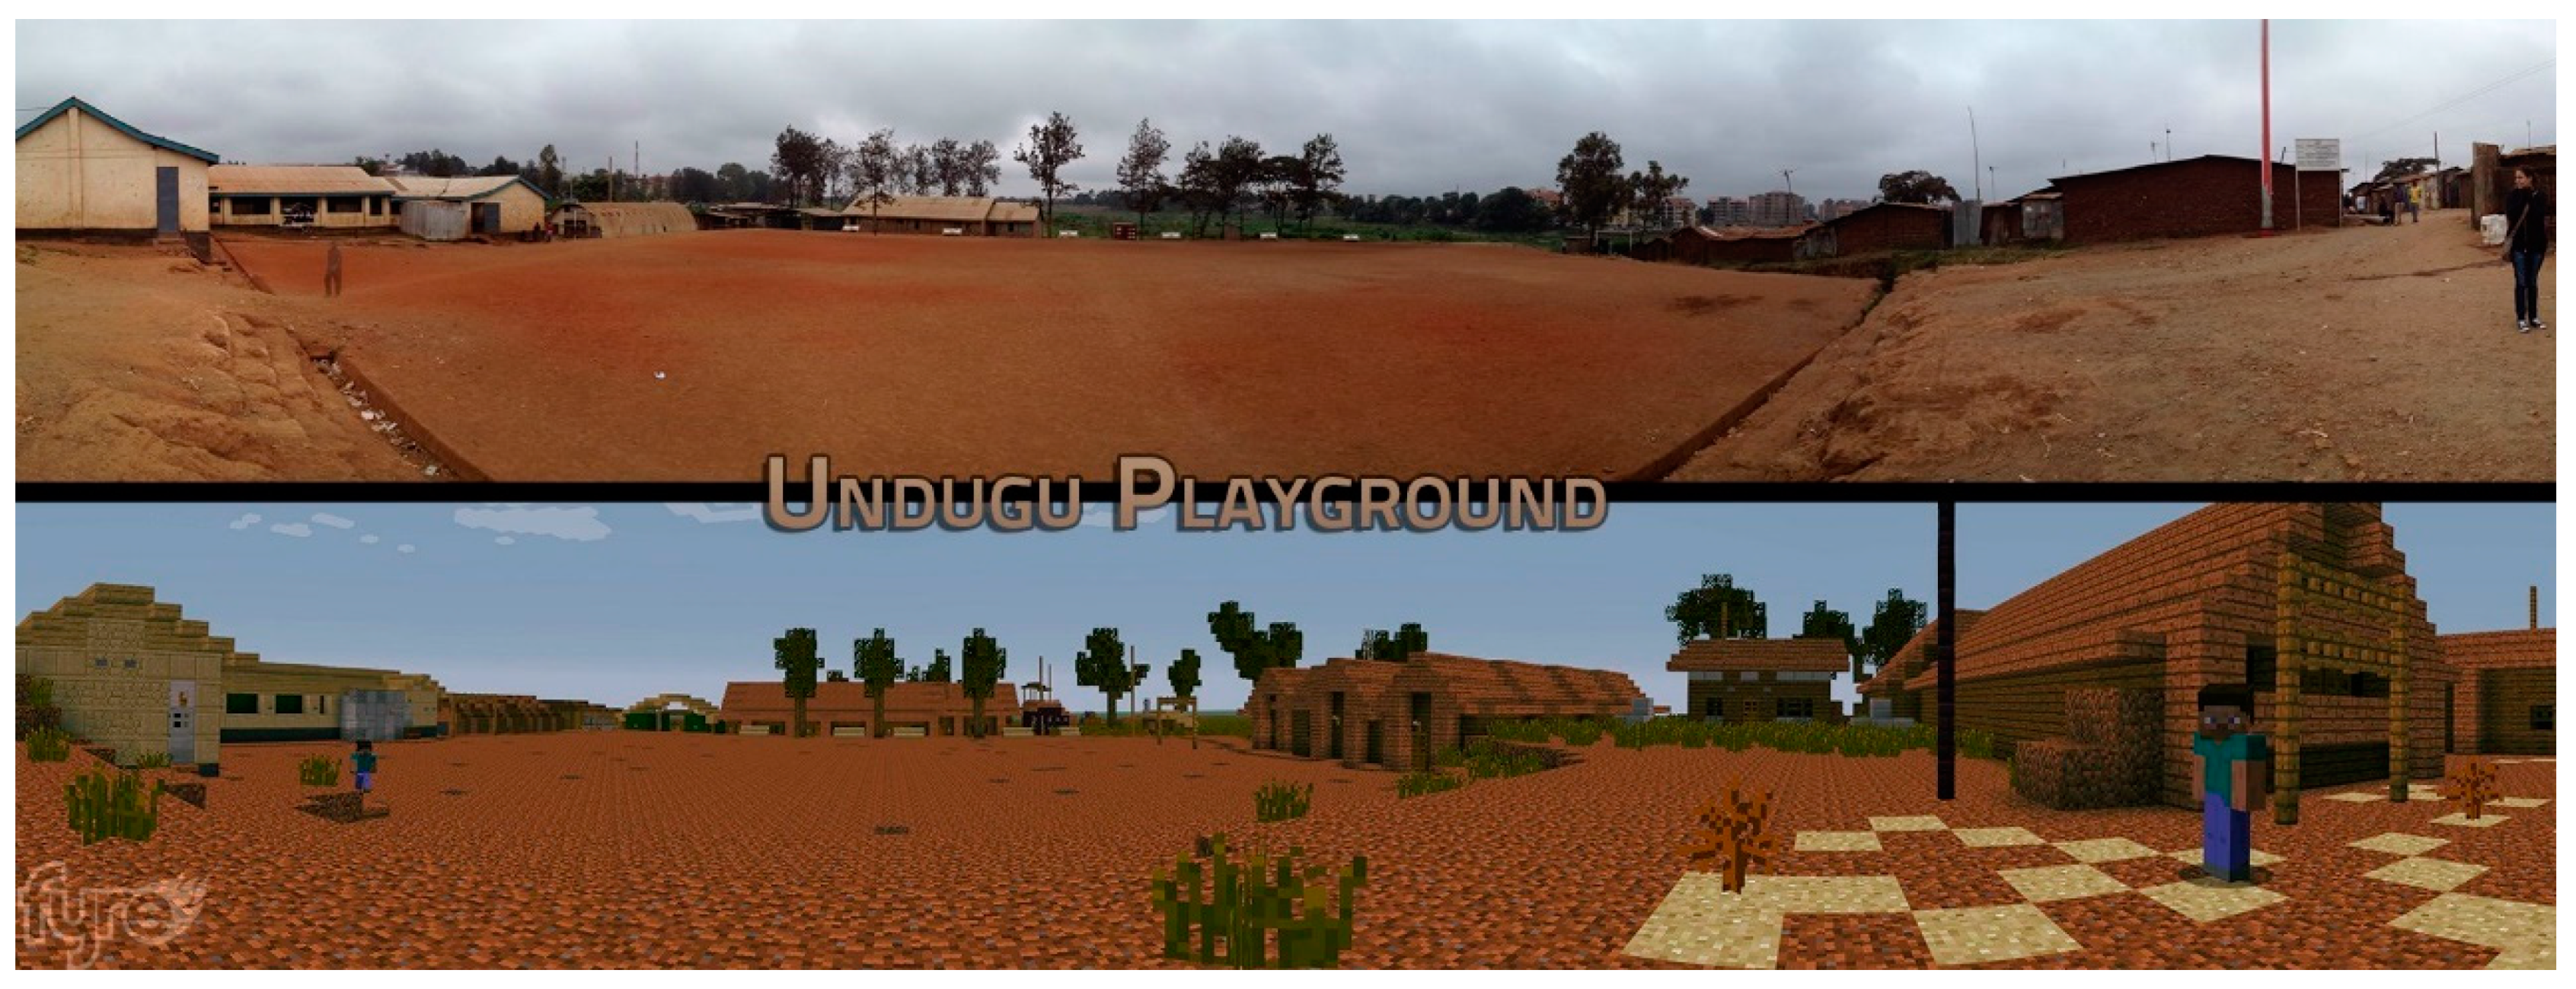 Ijgi Free Full Text Minecraft As A Tool For Engaging Children In Urban Planning A Case Study In Tirol Town Brazil Html